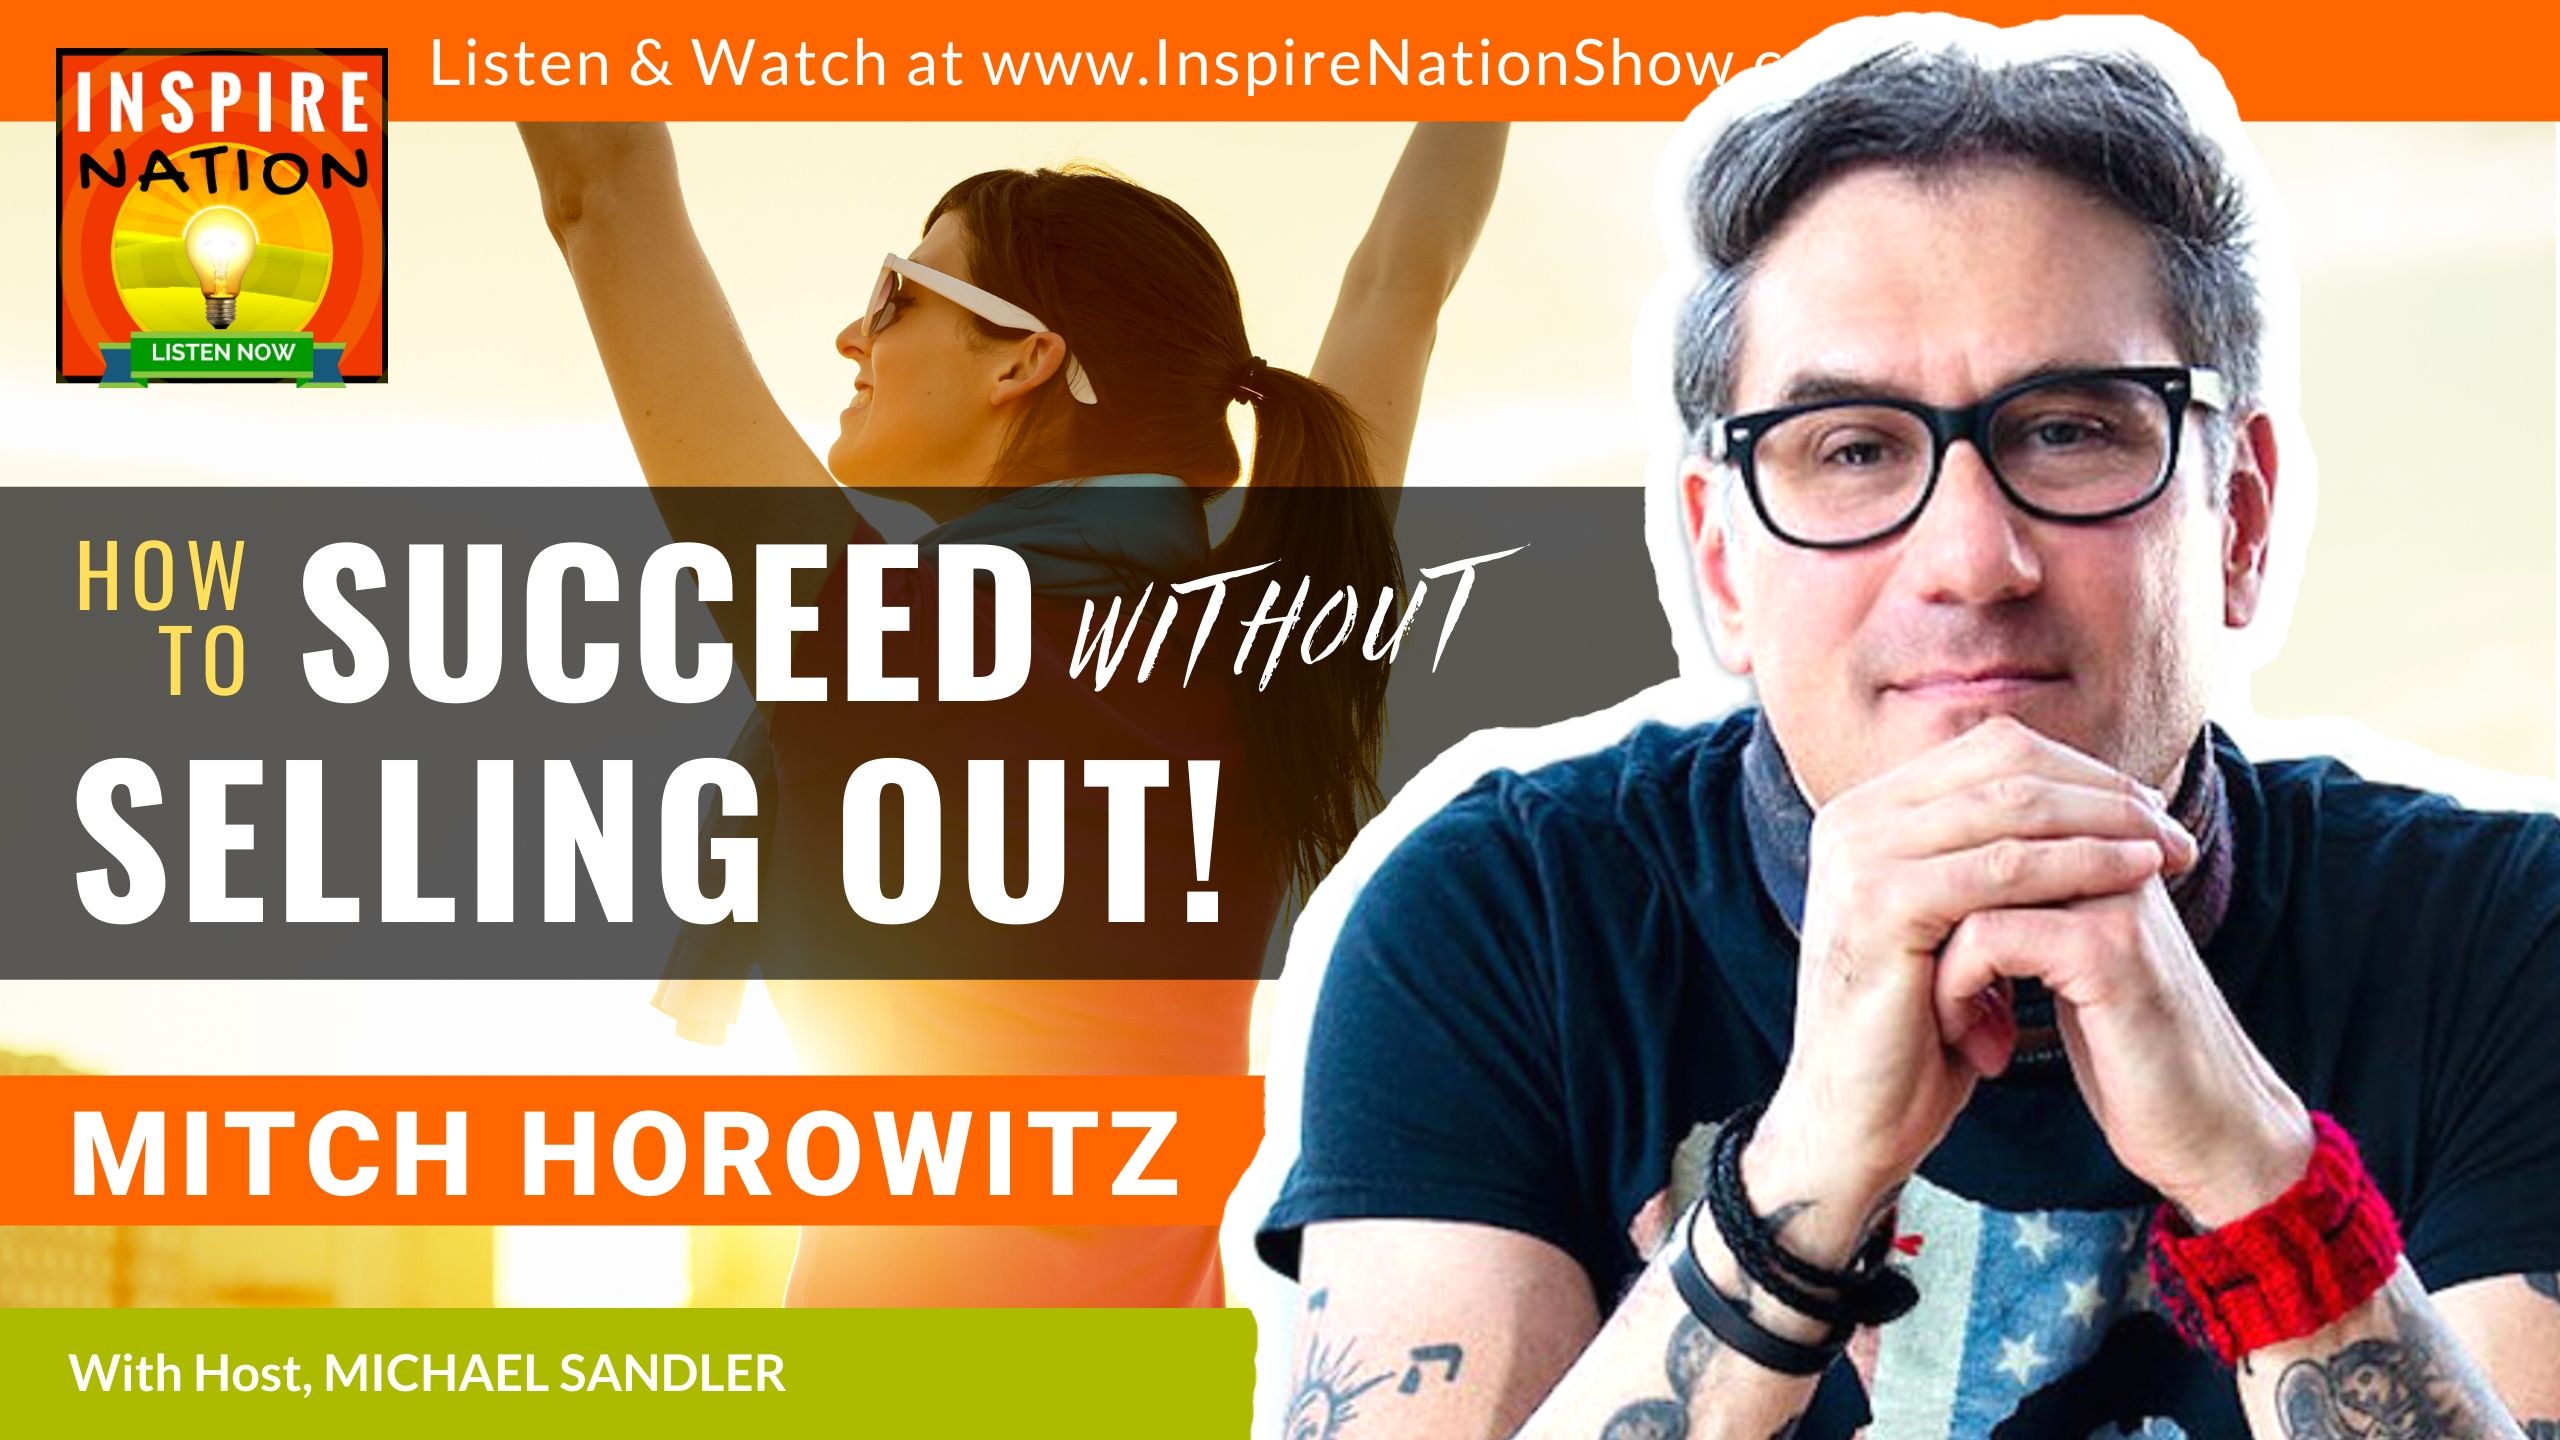 Michael Sandler interviews Mitch Horowitz on how to succeed without selling out! That plus, satanism?